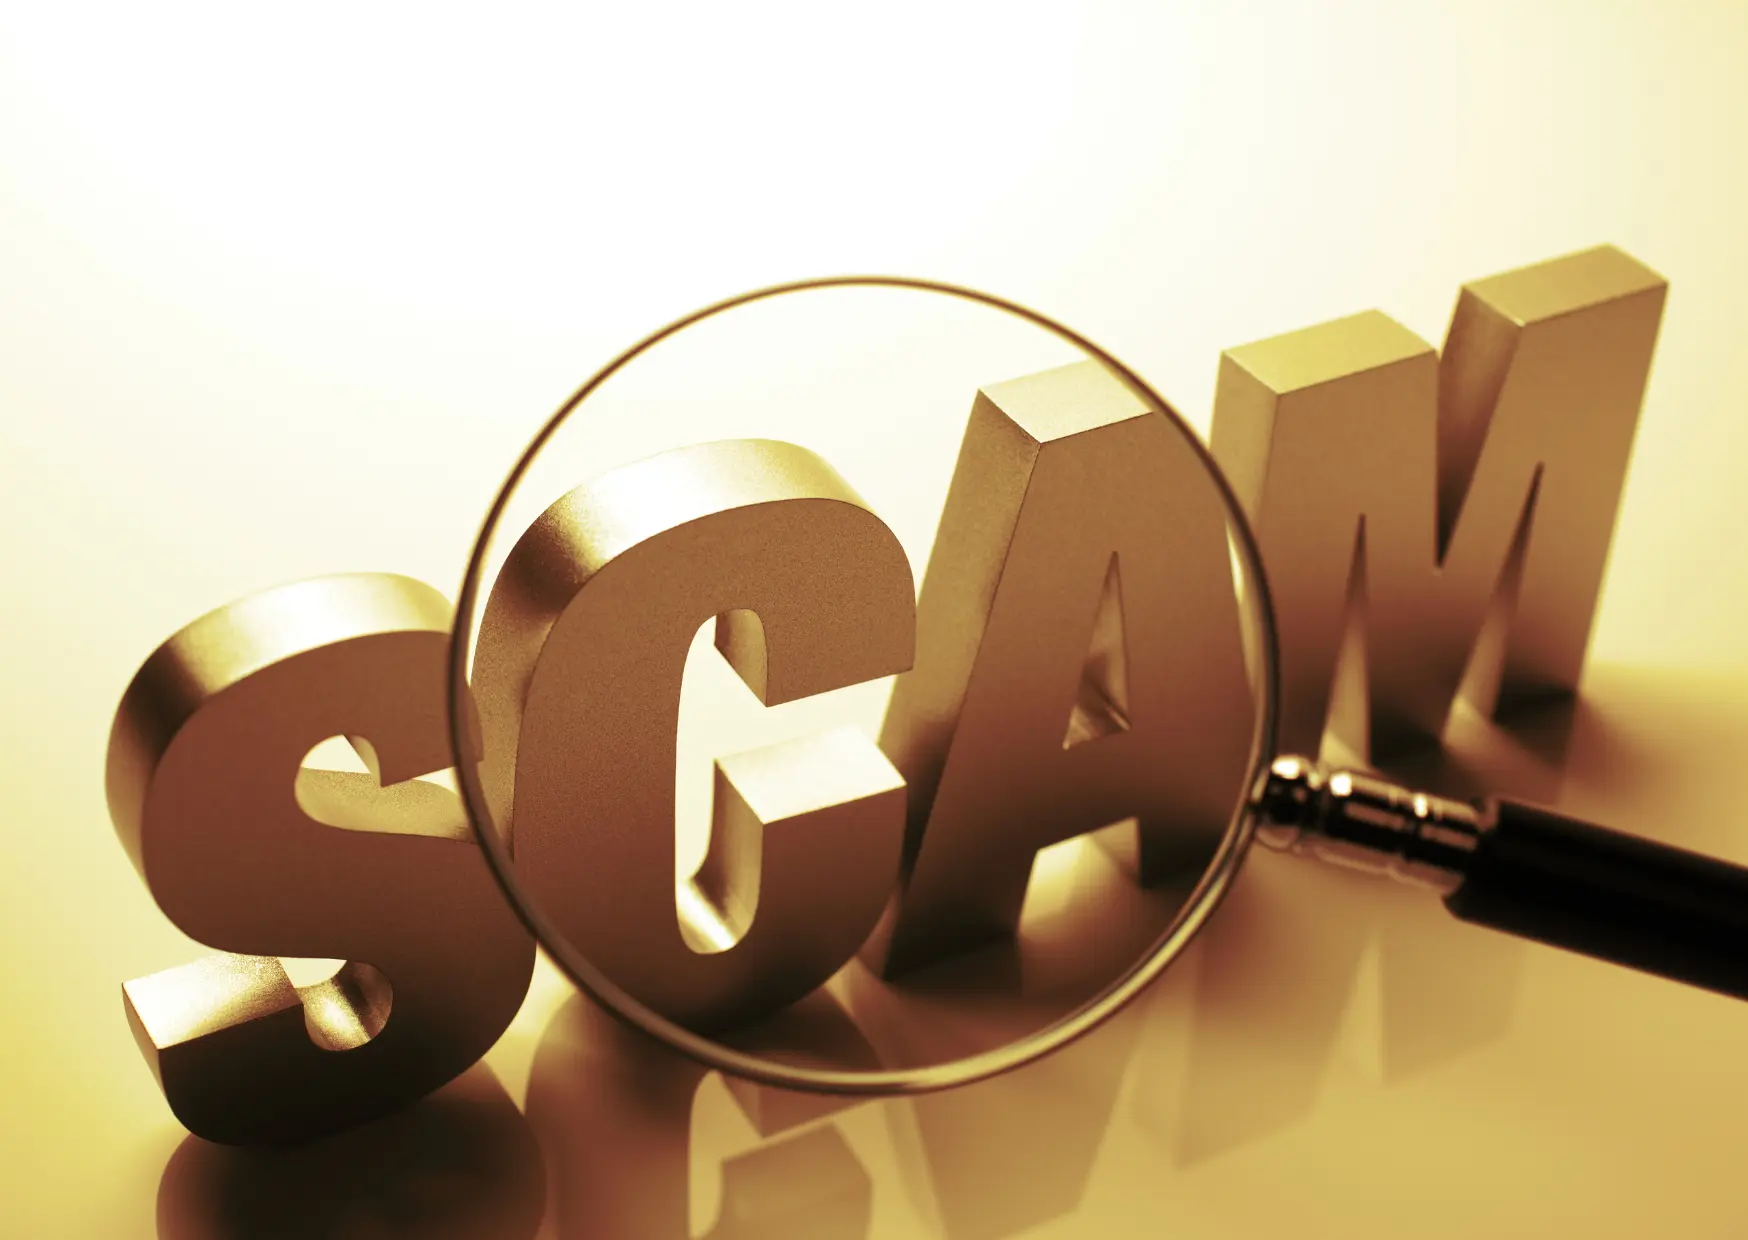 where to report online fraud? Student scams fraud increase